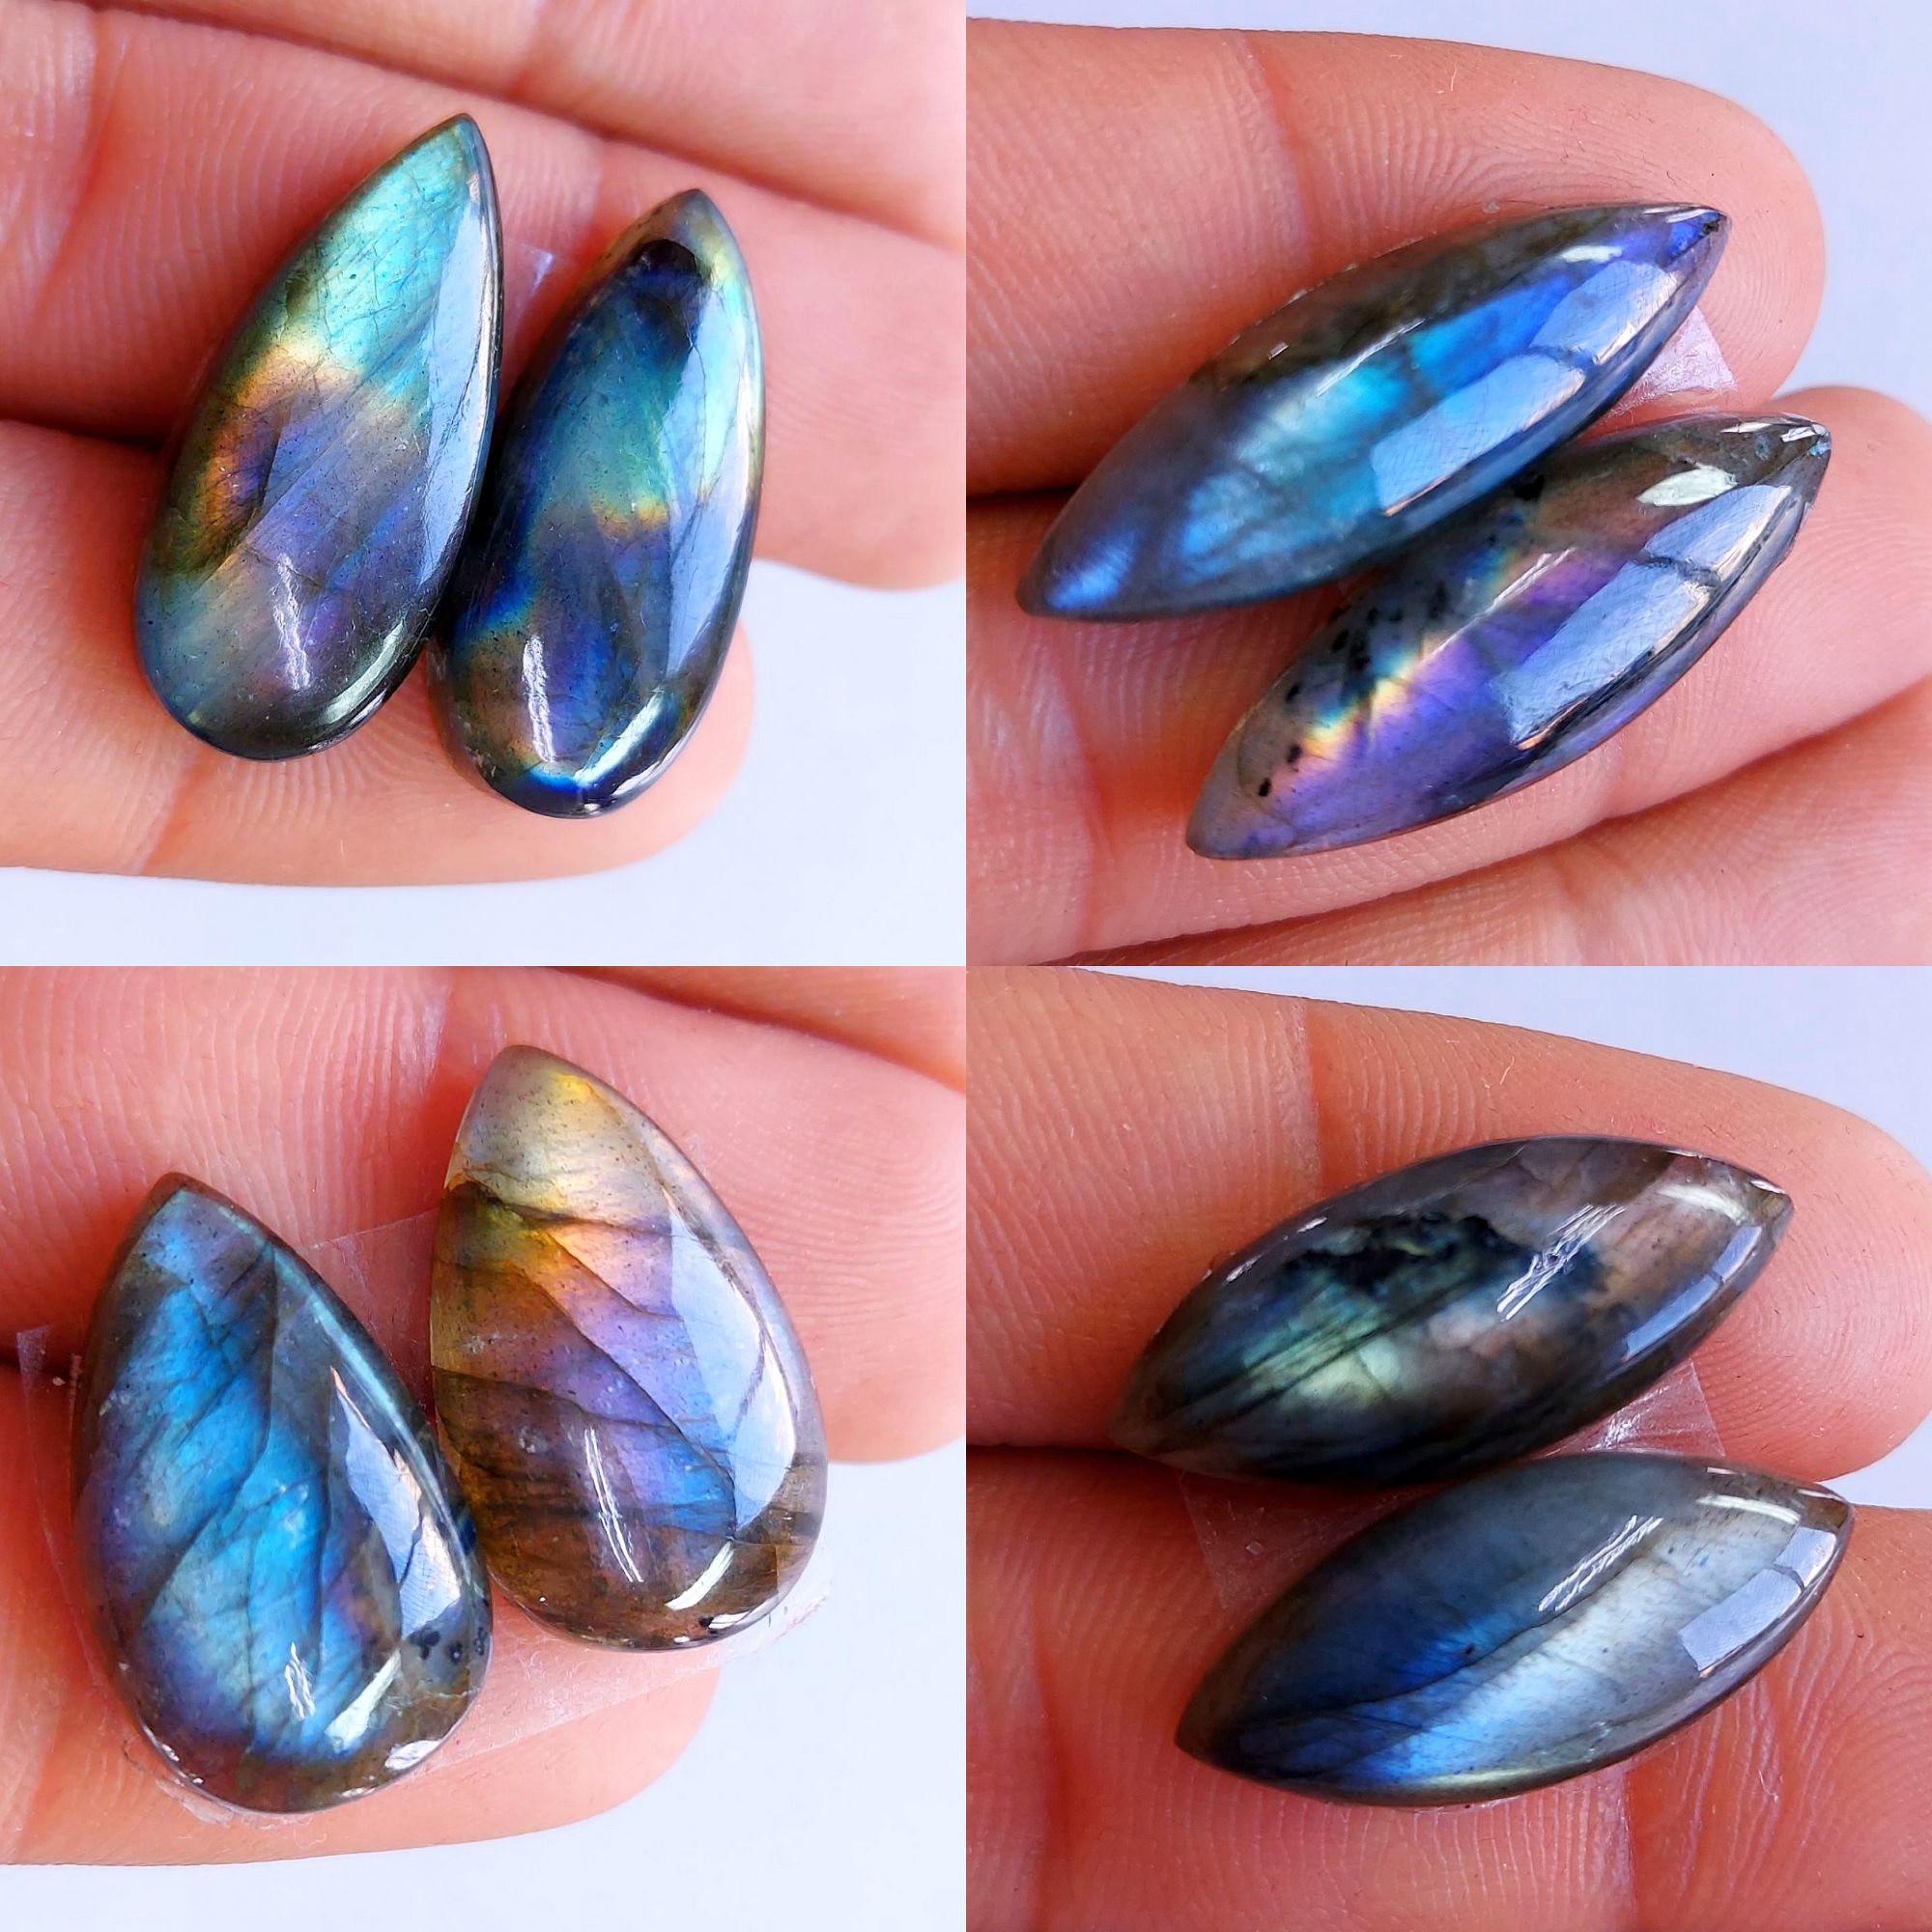 4 Pairs lot 107Cts Natural Labradorite cabochon pair lot for jewelry making loose gemstone lot mix shape and size earring pairs 24x10 20x12mm